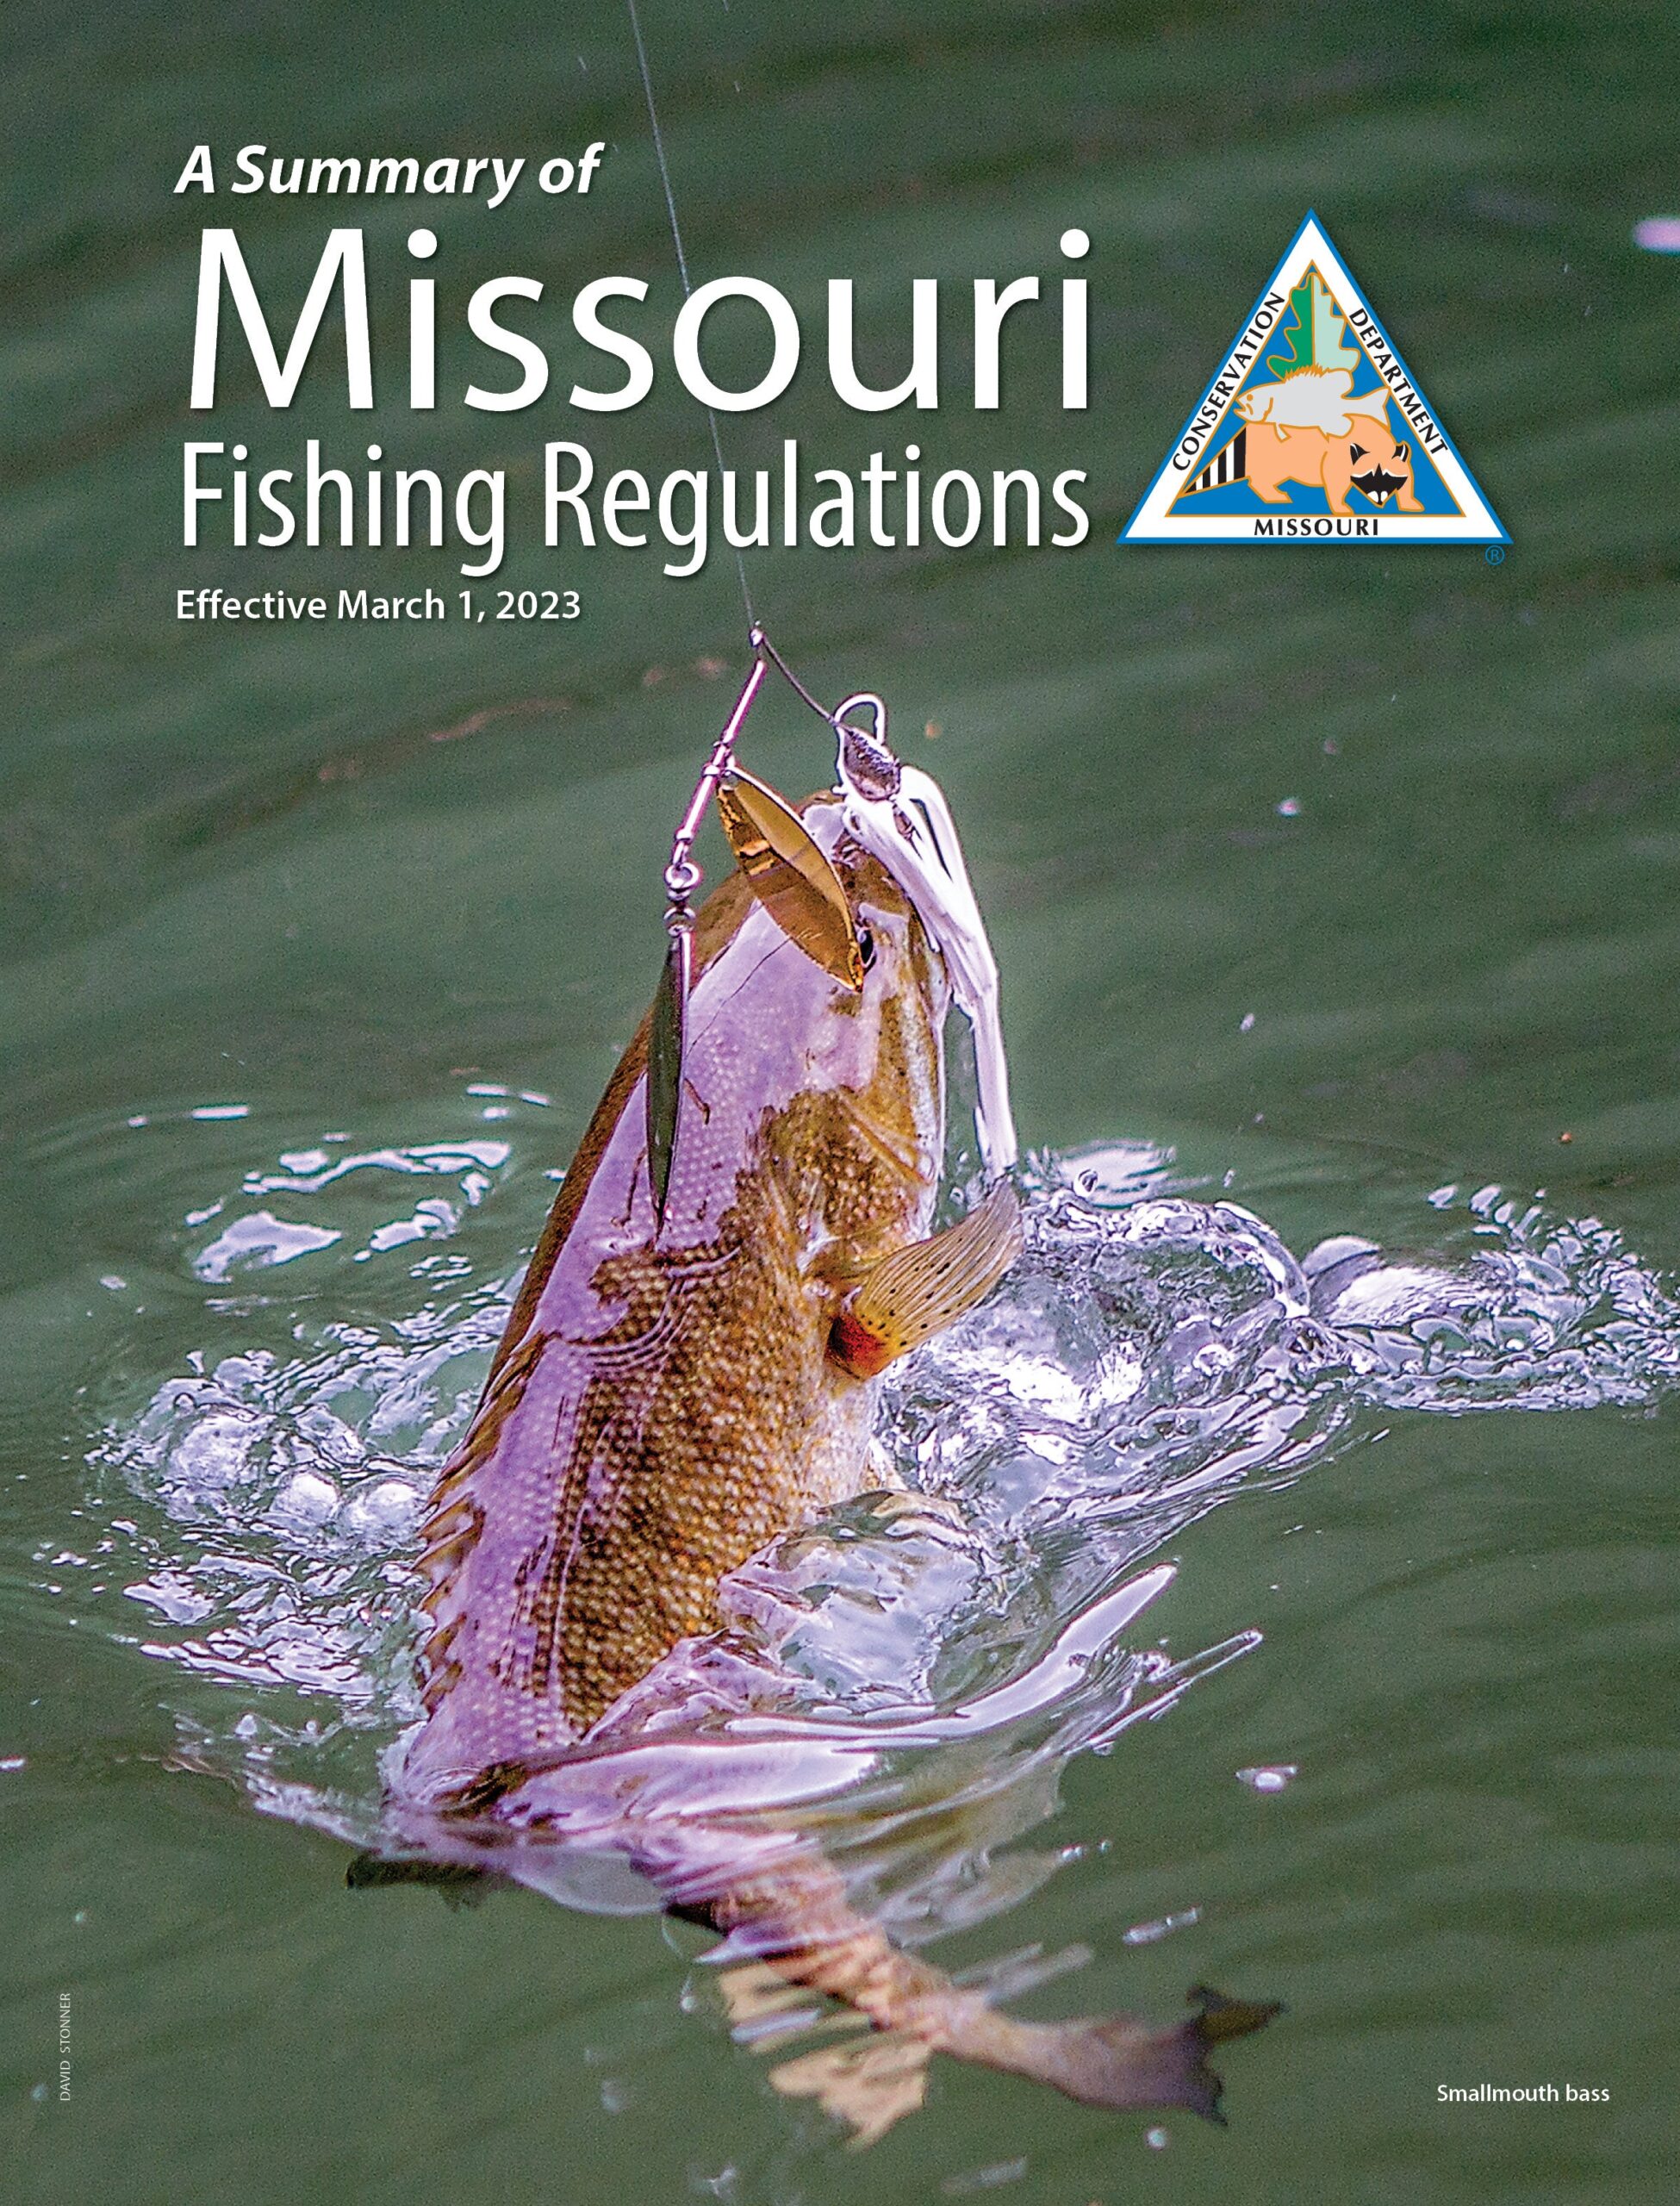 How Much are Fishing Licenses in Missouri